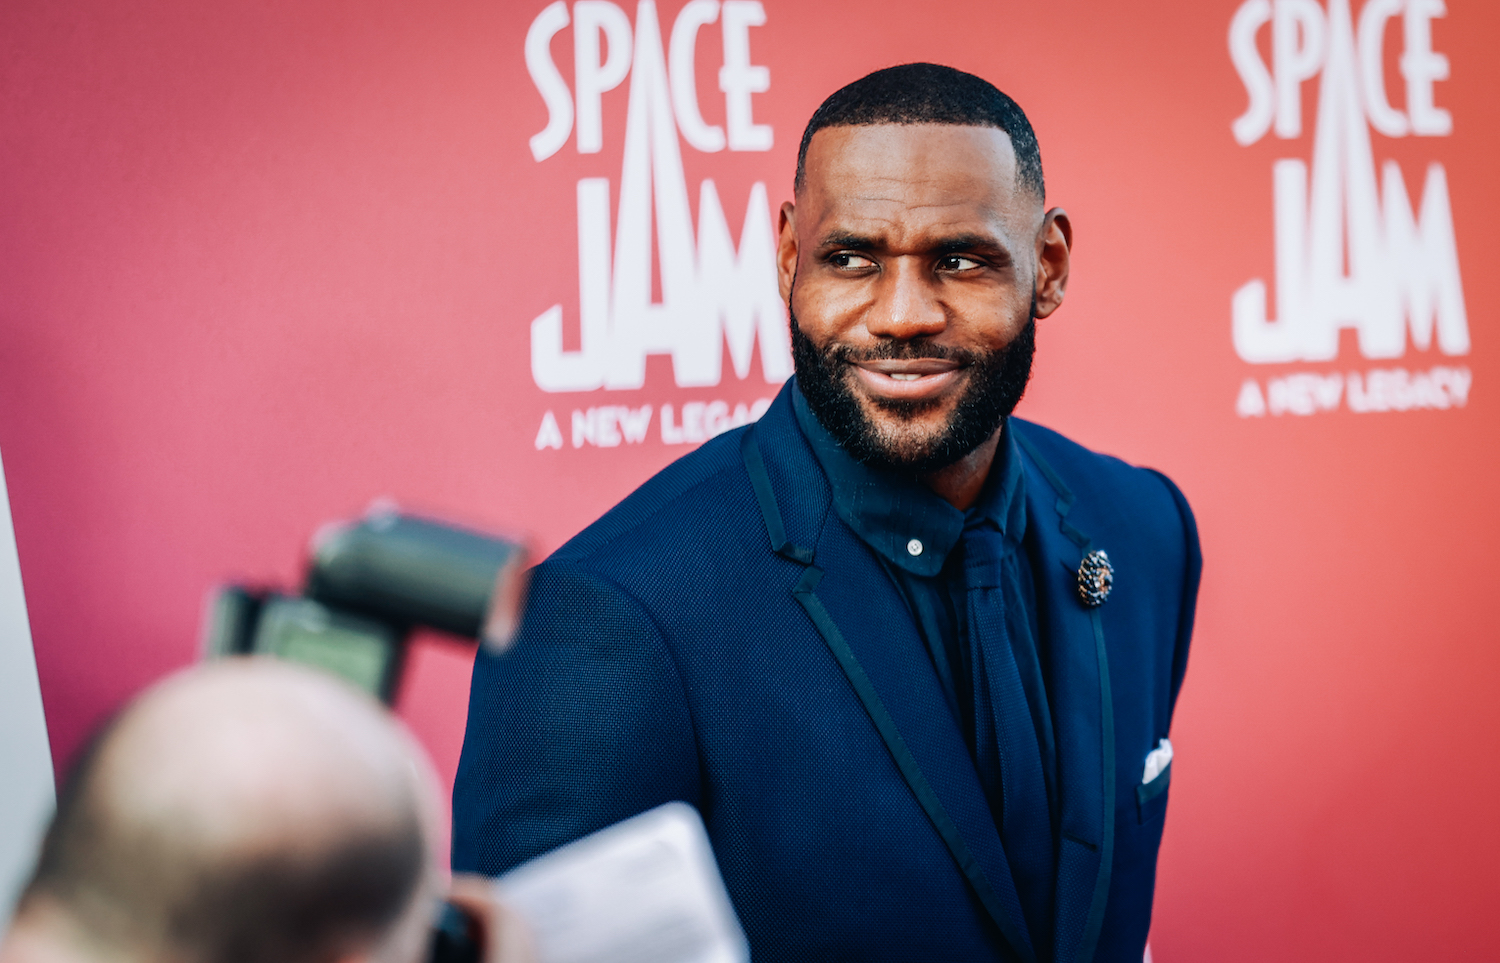 LA Lakers star LeBron James LeBron James attends the premiere of "Space Jam: A New Legacy"